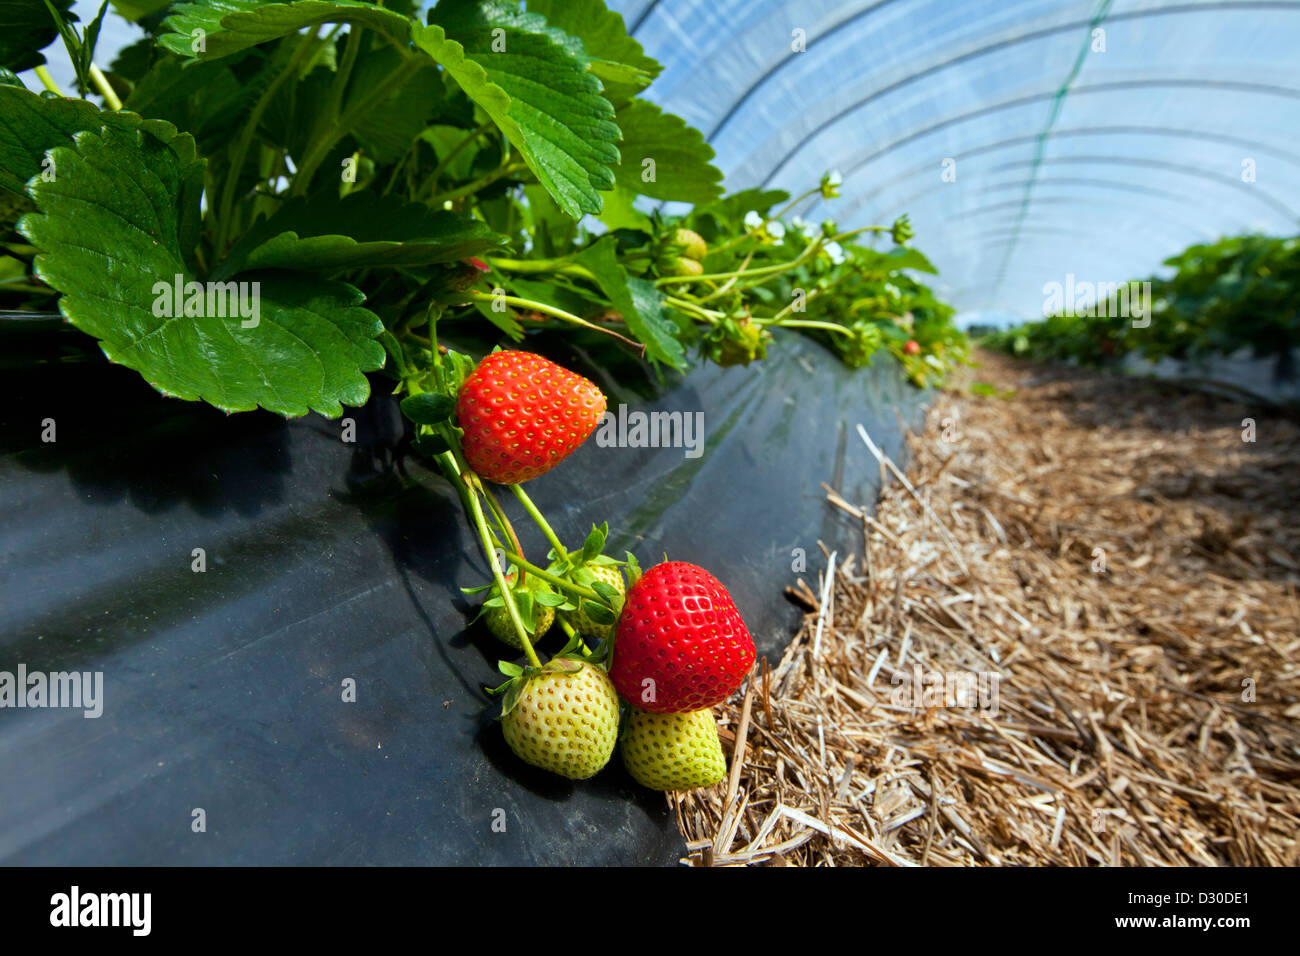 Cultivation of garden strawberries (Fragaria x ananassa) in plastic greenhouse, Germany Stock Photo